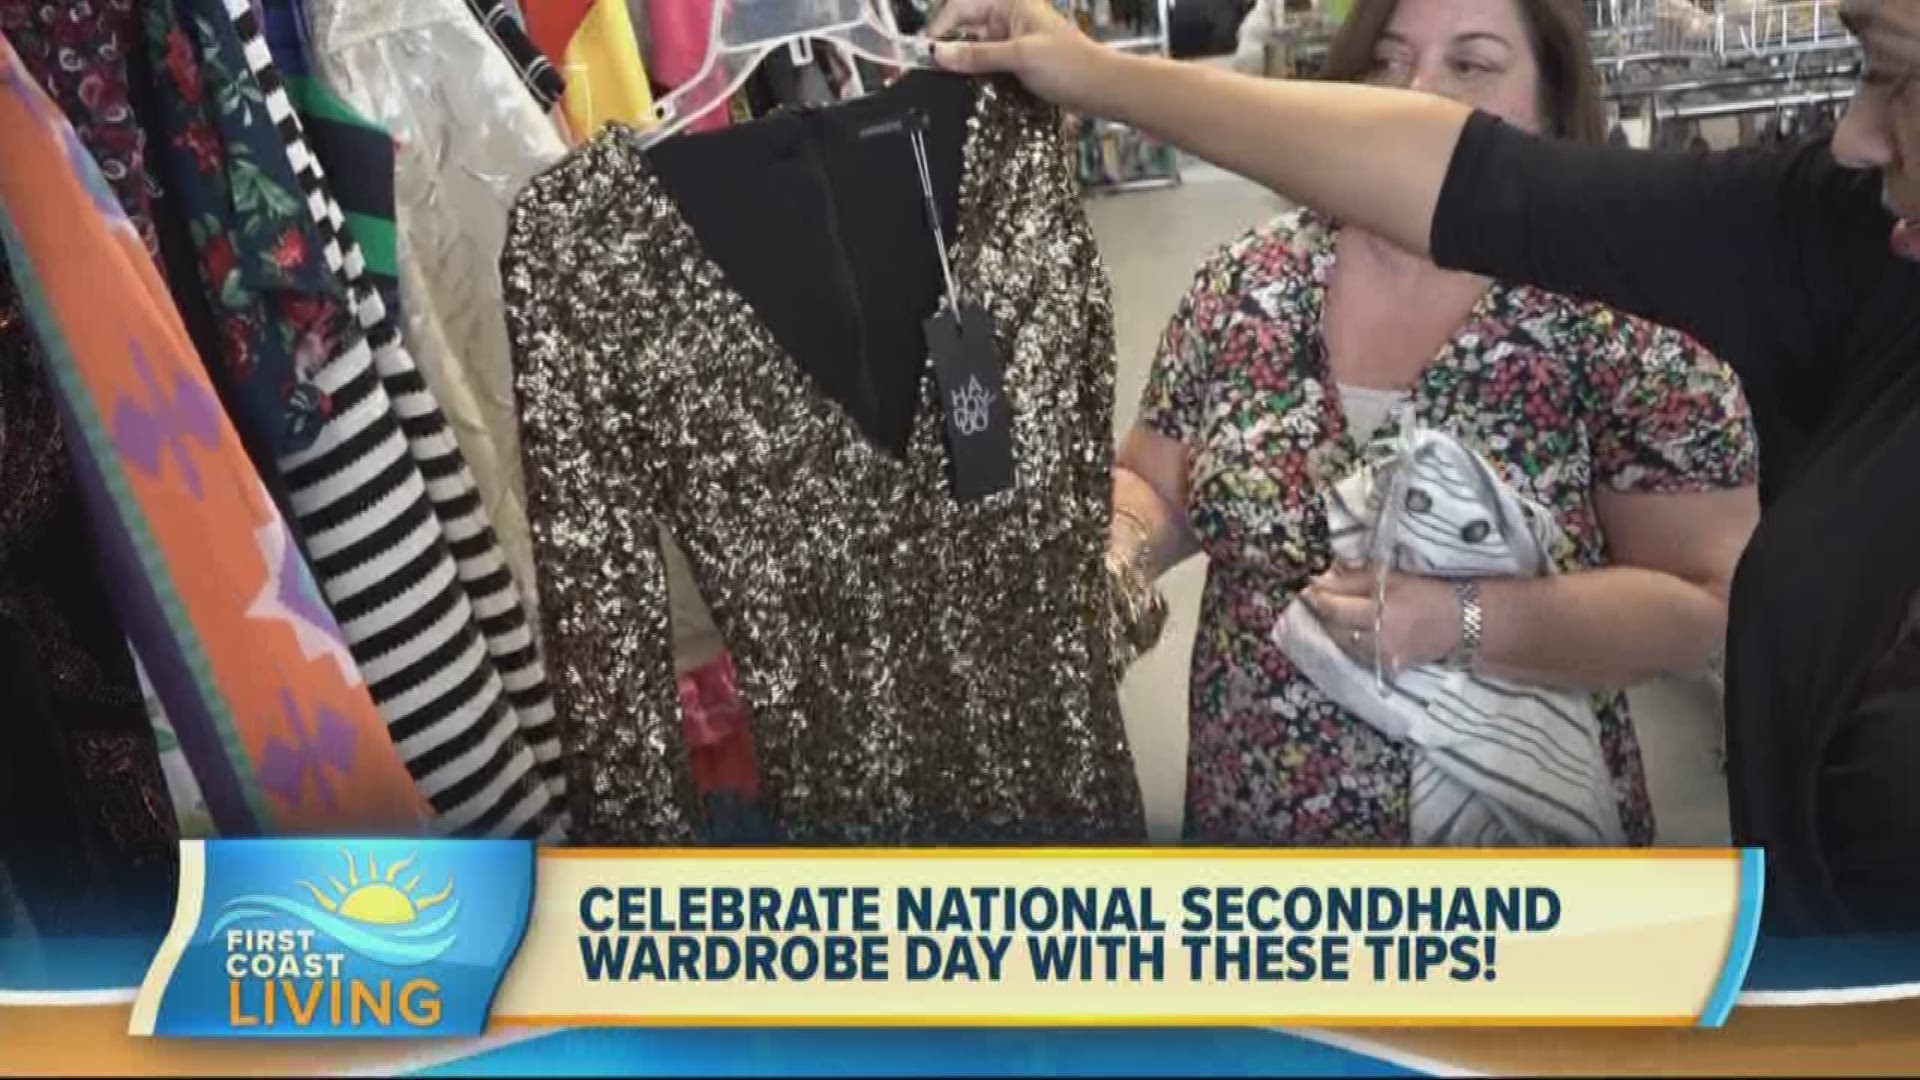 Celebrate National Secondhand Wardrobe Day in style!